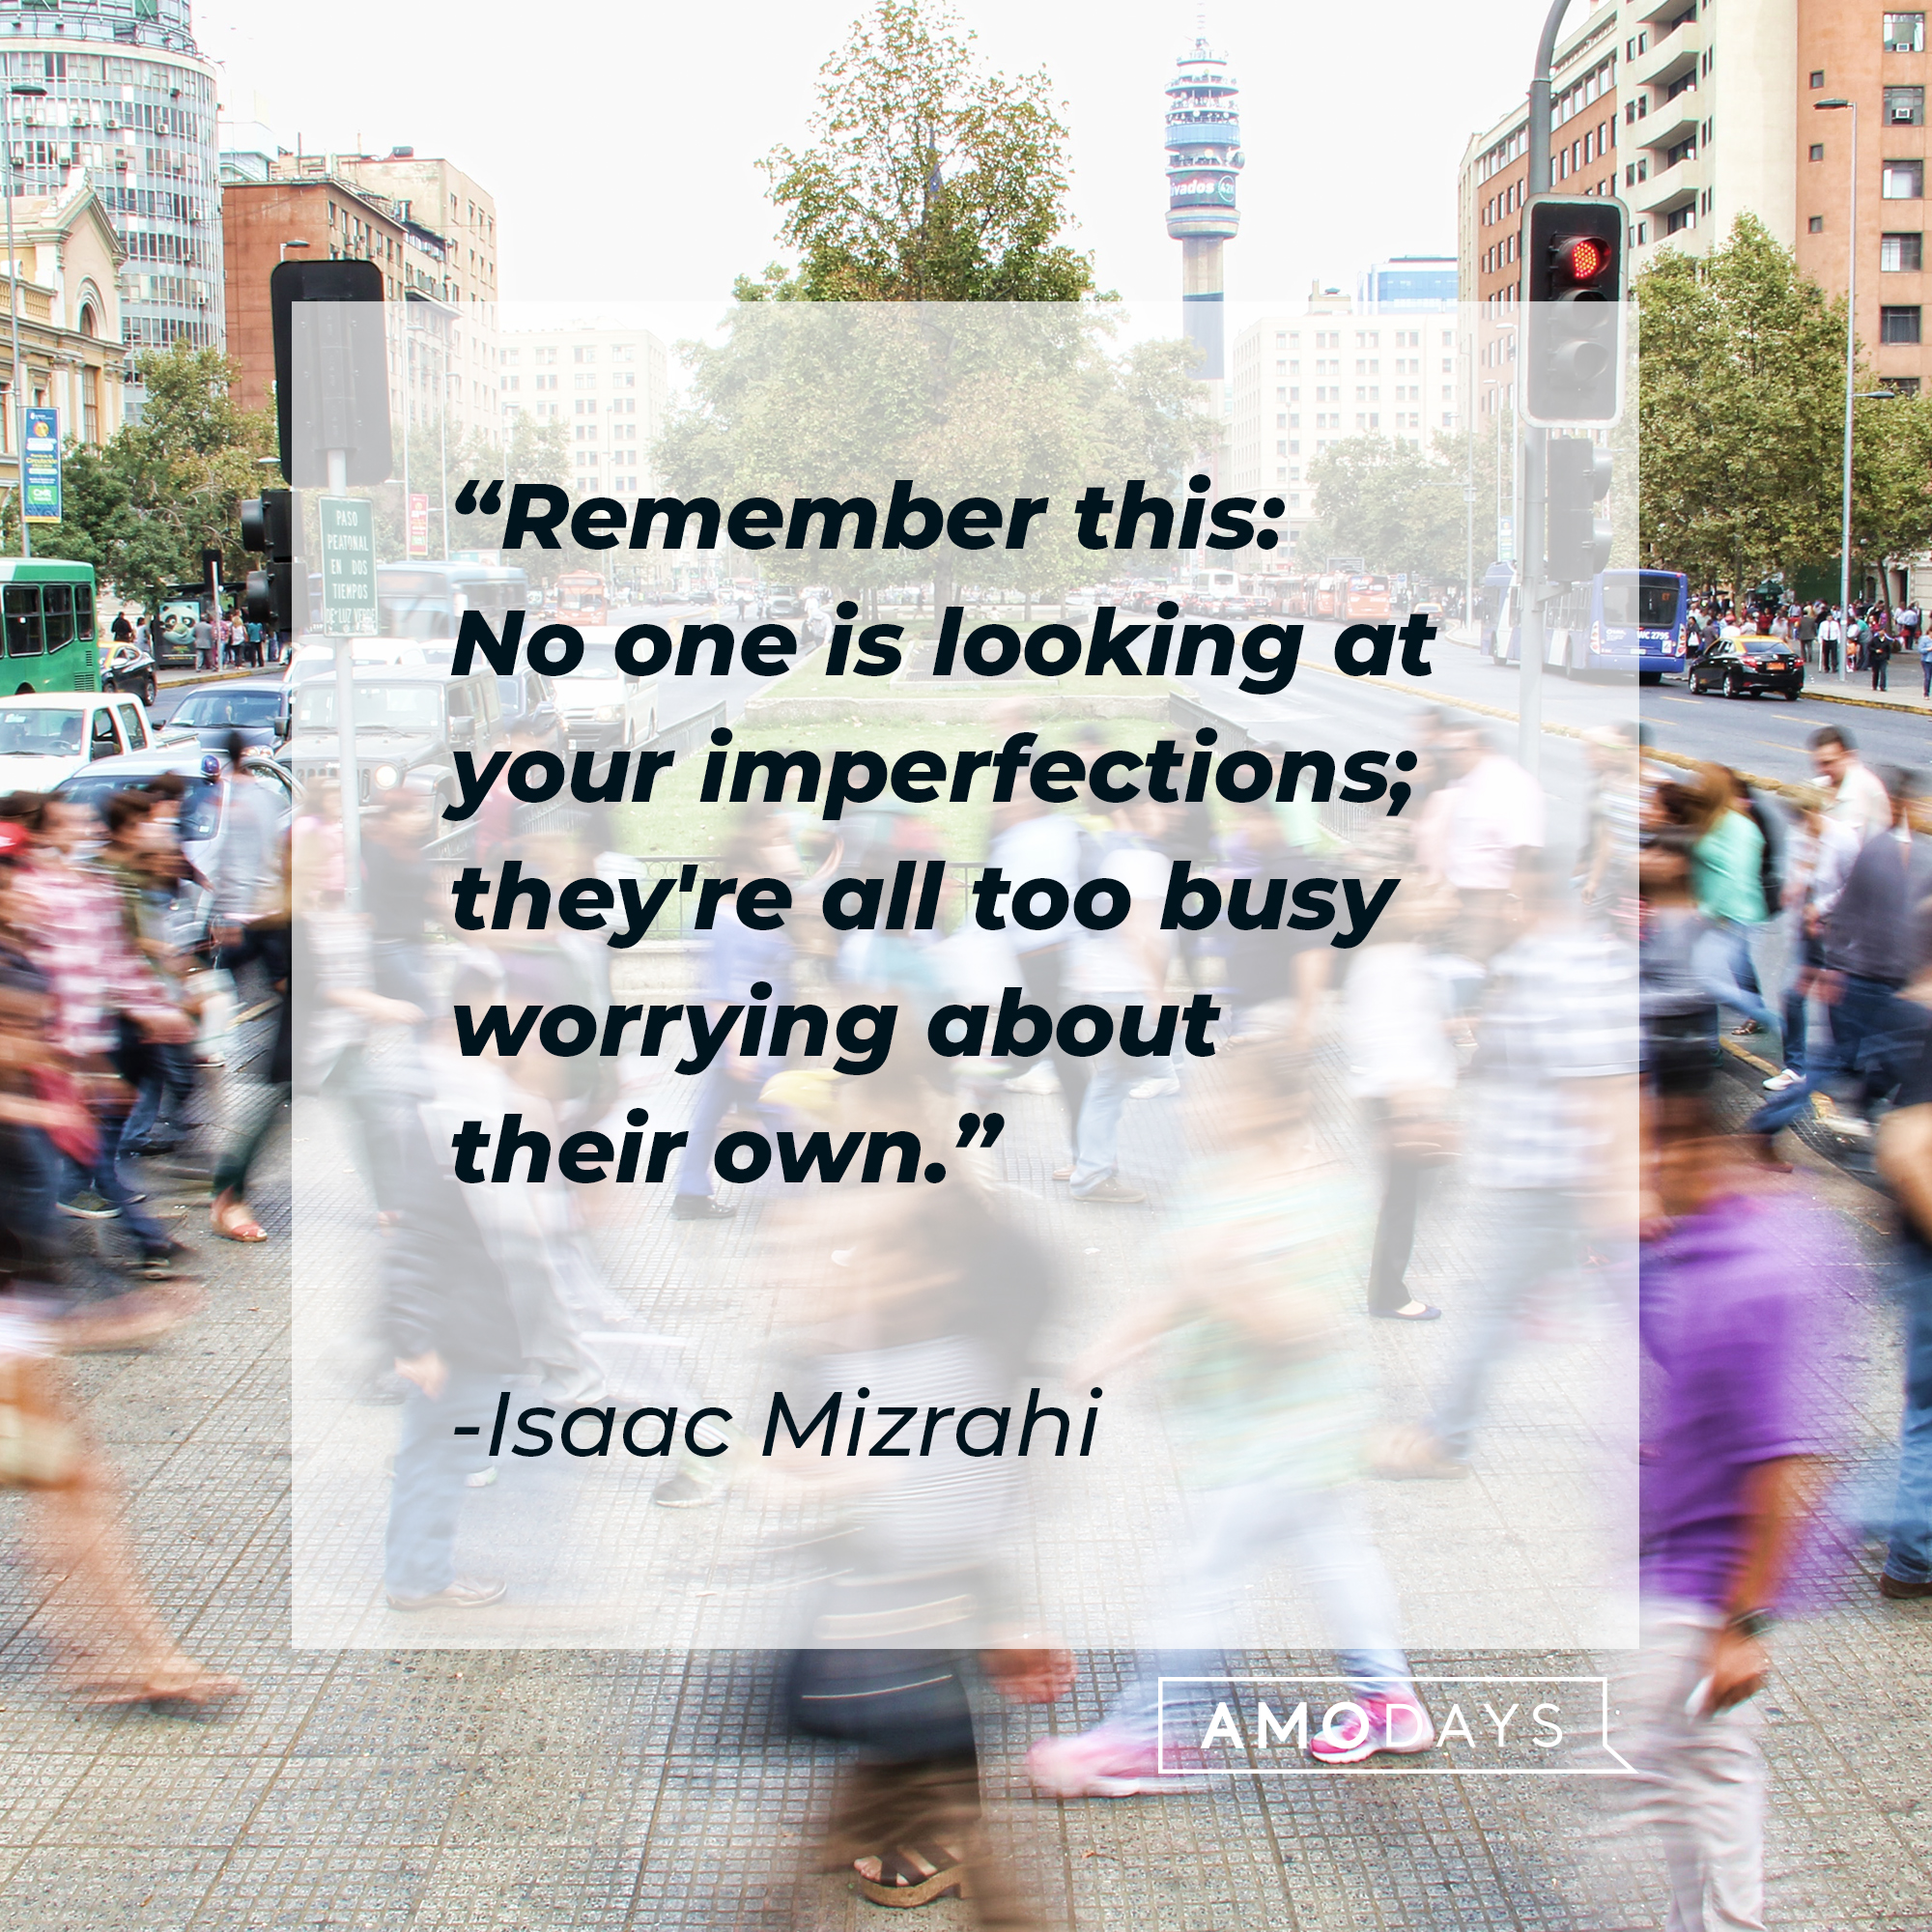 Isaac Mizrahi's quote: "Remember this: No one is looking at your imperfections; they're all too busy worrying about their own." | Image: Unsplash